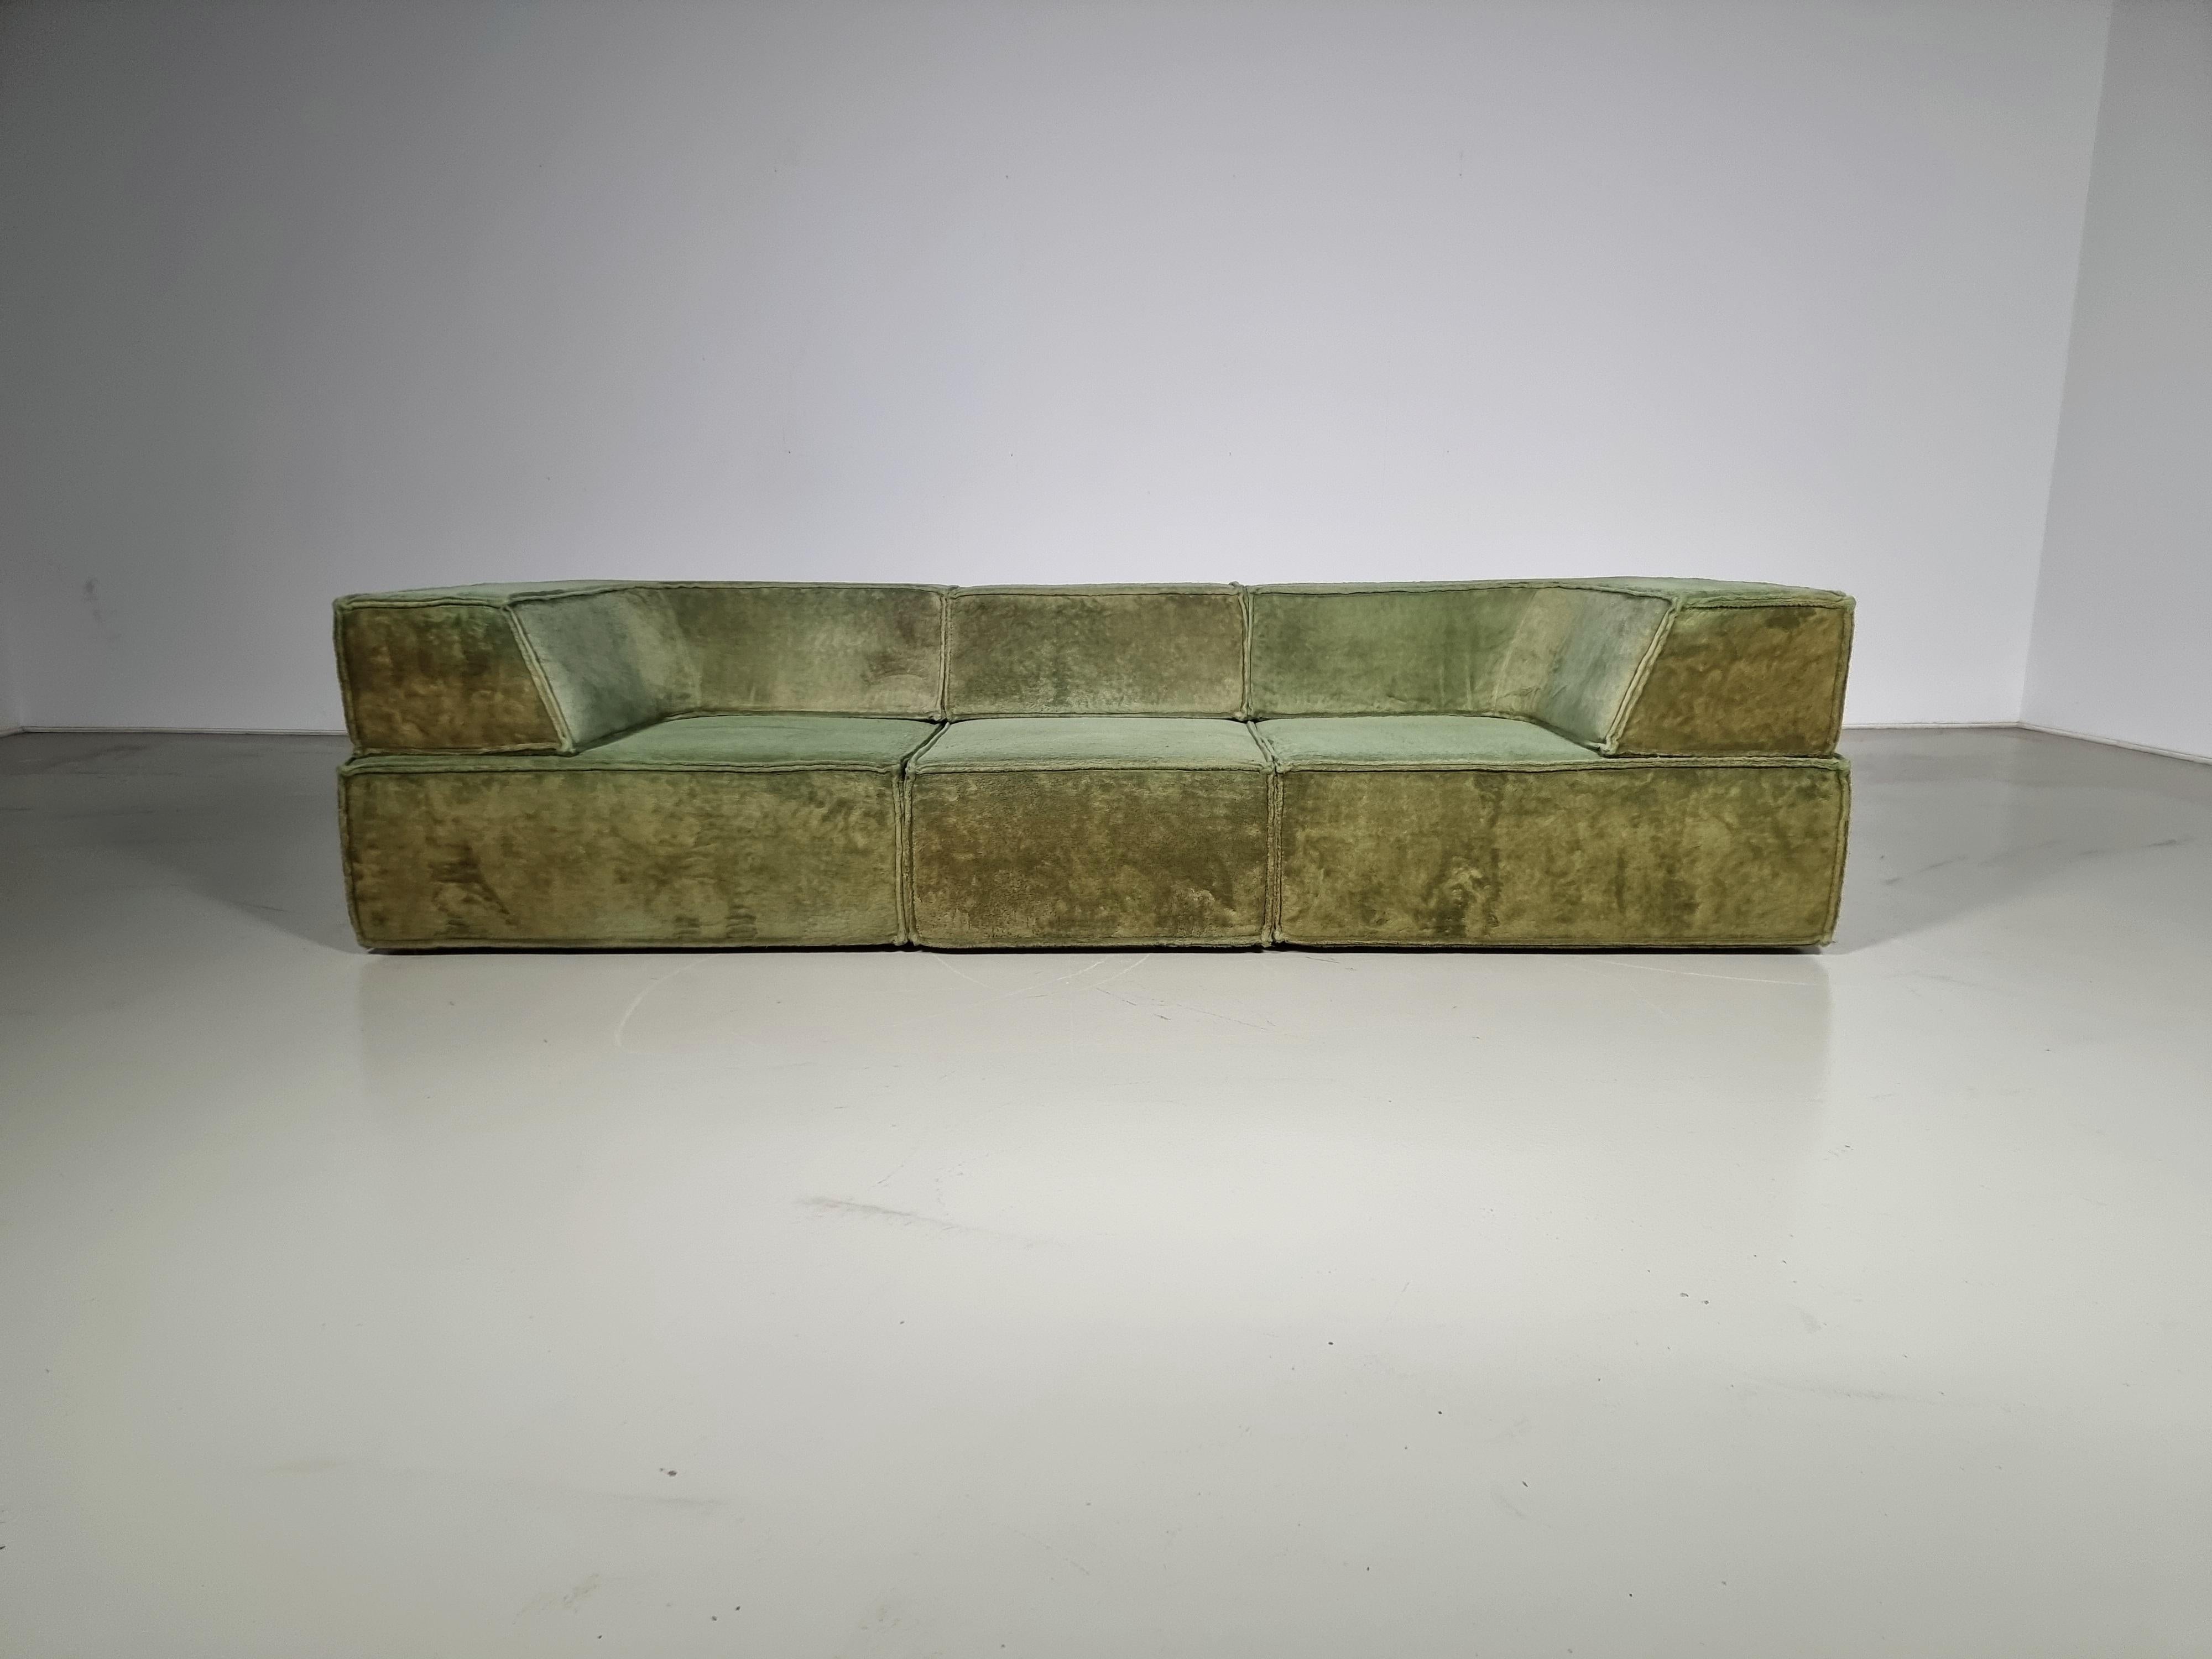 This comfortable sectional sofa that was designed by the Swiss Designers Group Team Form AG and produced in the 1970s by COR, Germany. Many different kinds of variants are possible because of the modular and adjustable system of the sofa. In its